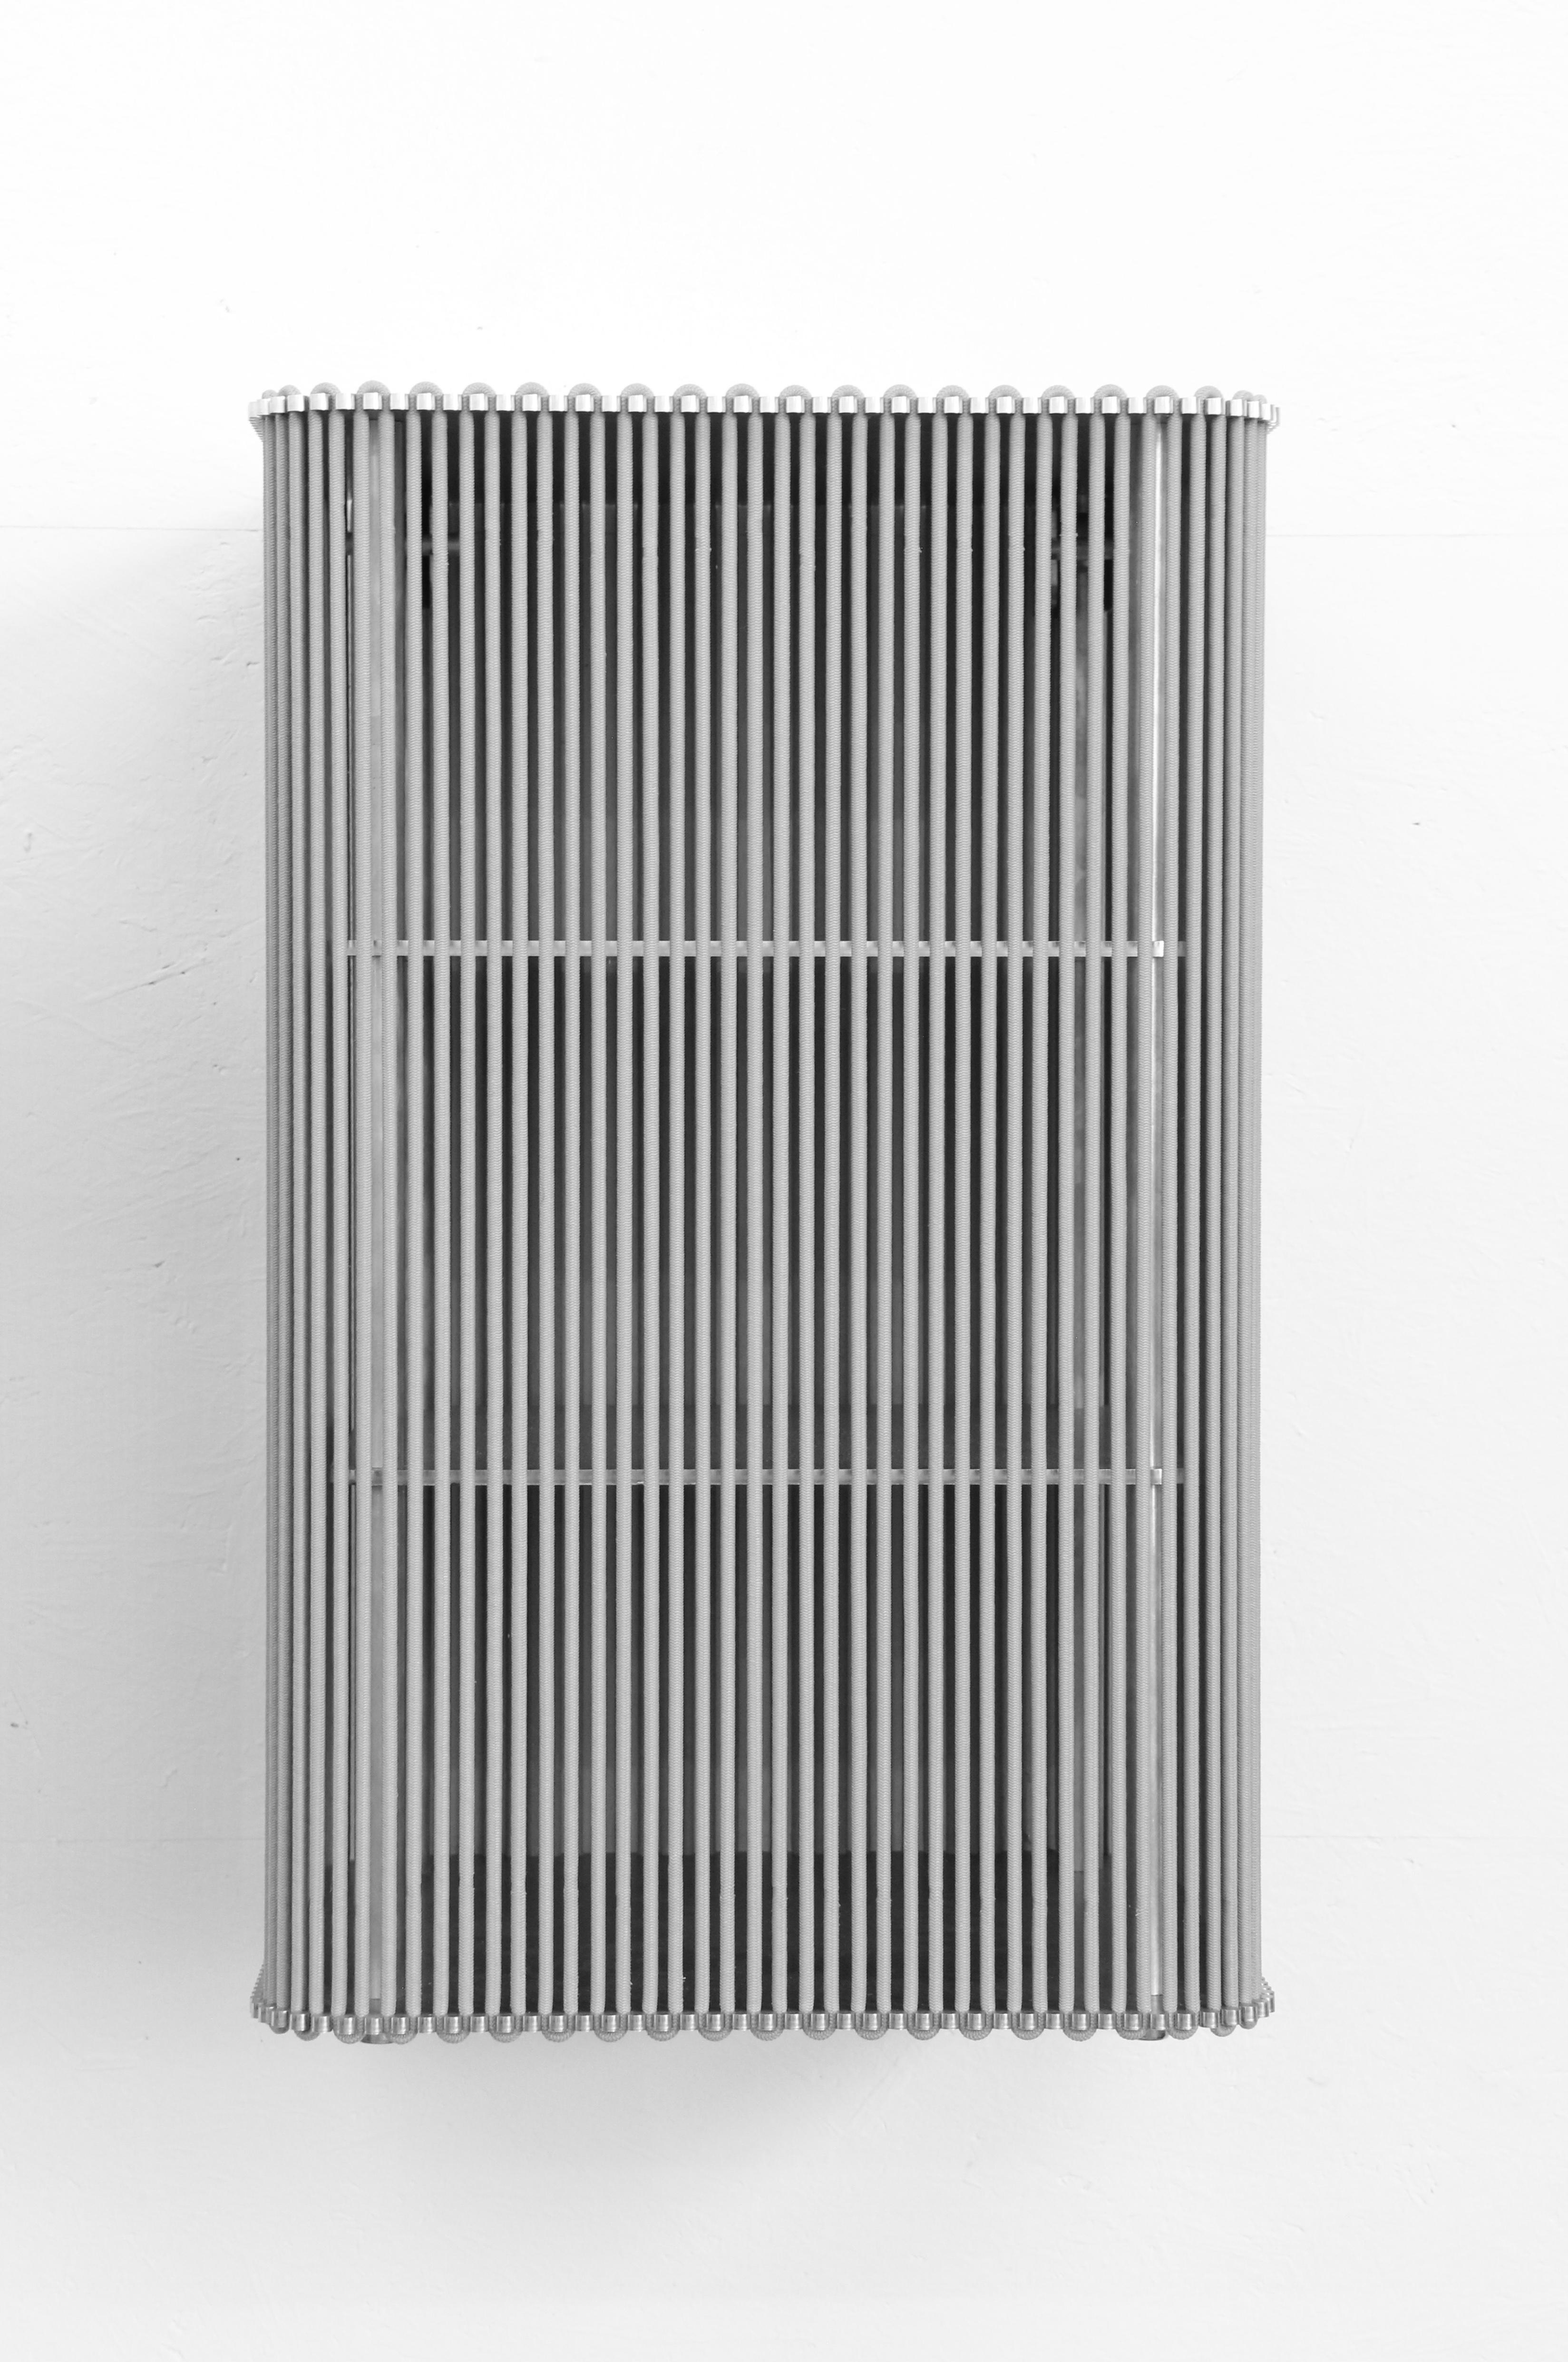 Aluminum Coil Square Cabinet Wall Mounted/ Side Table by Bram Kerkhofs